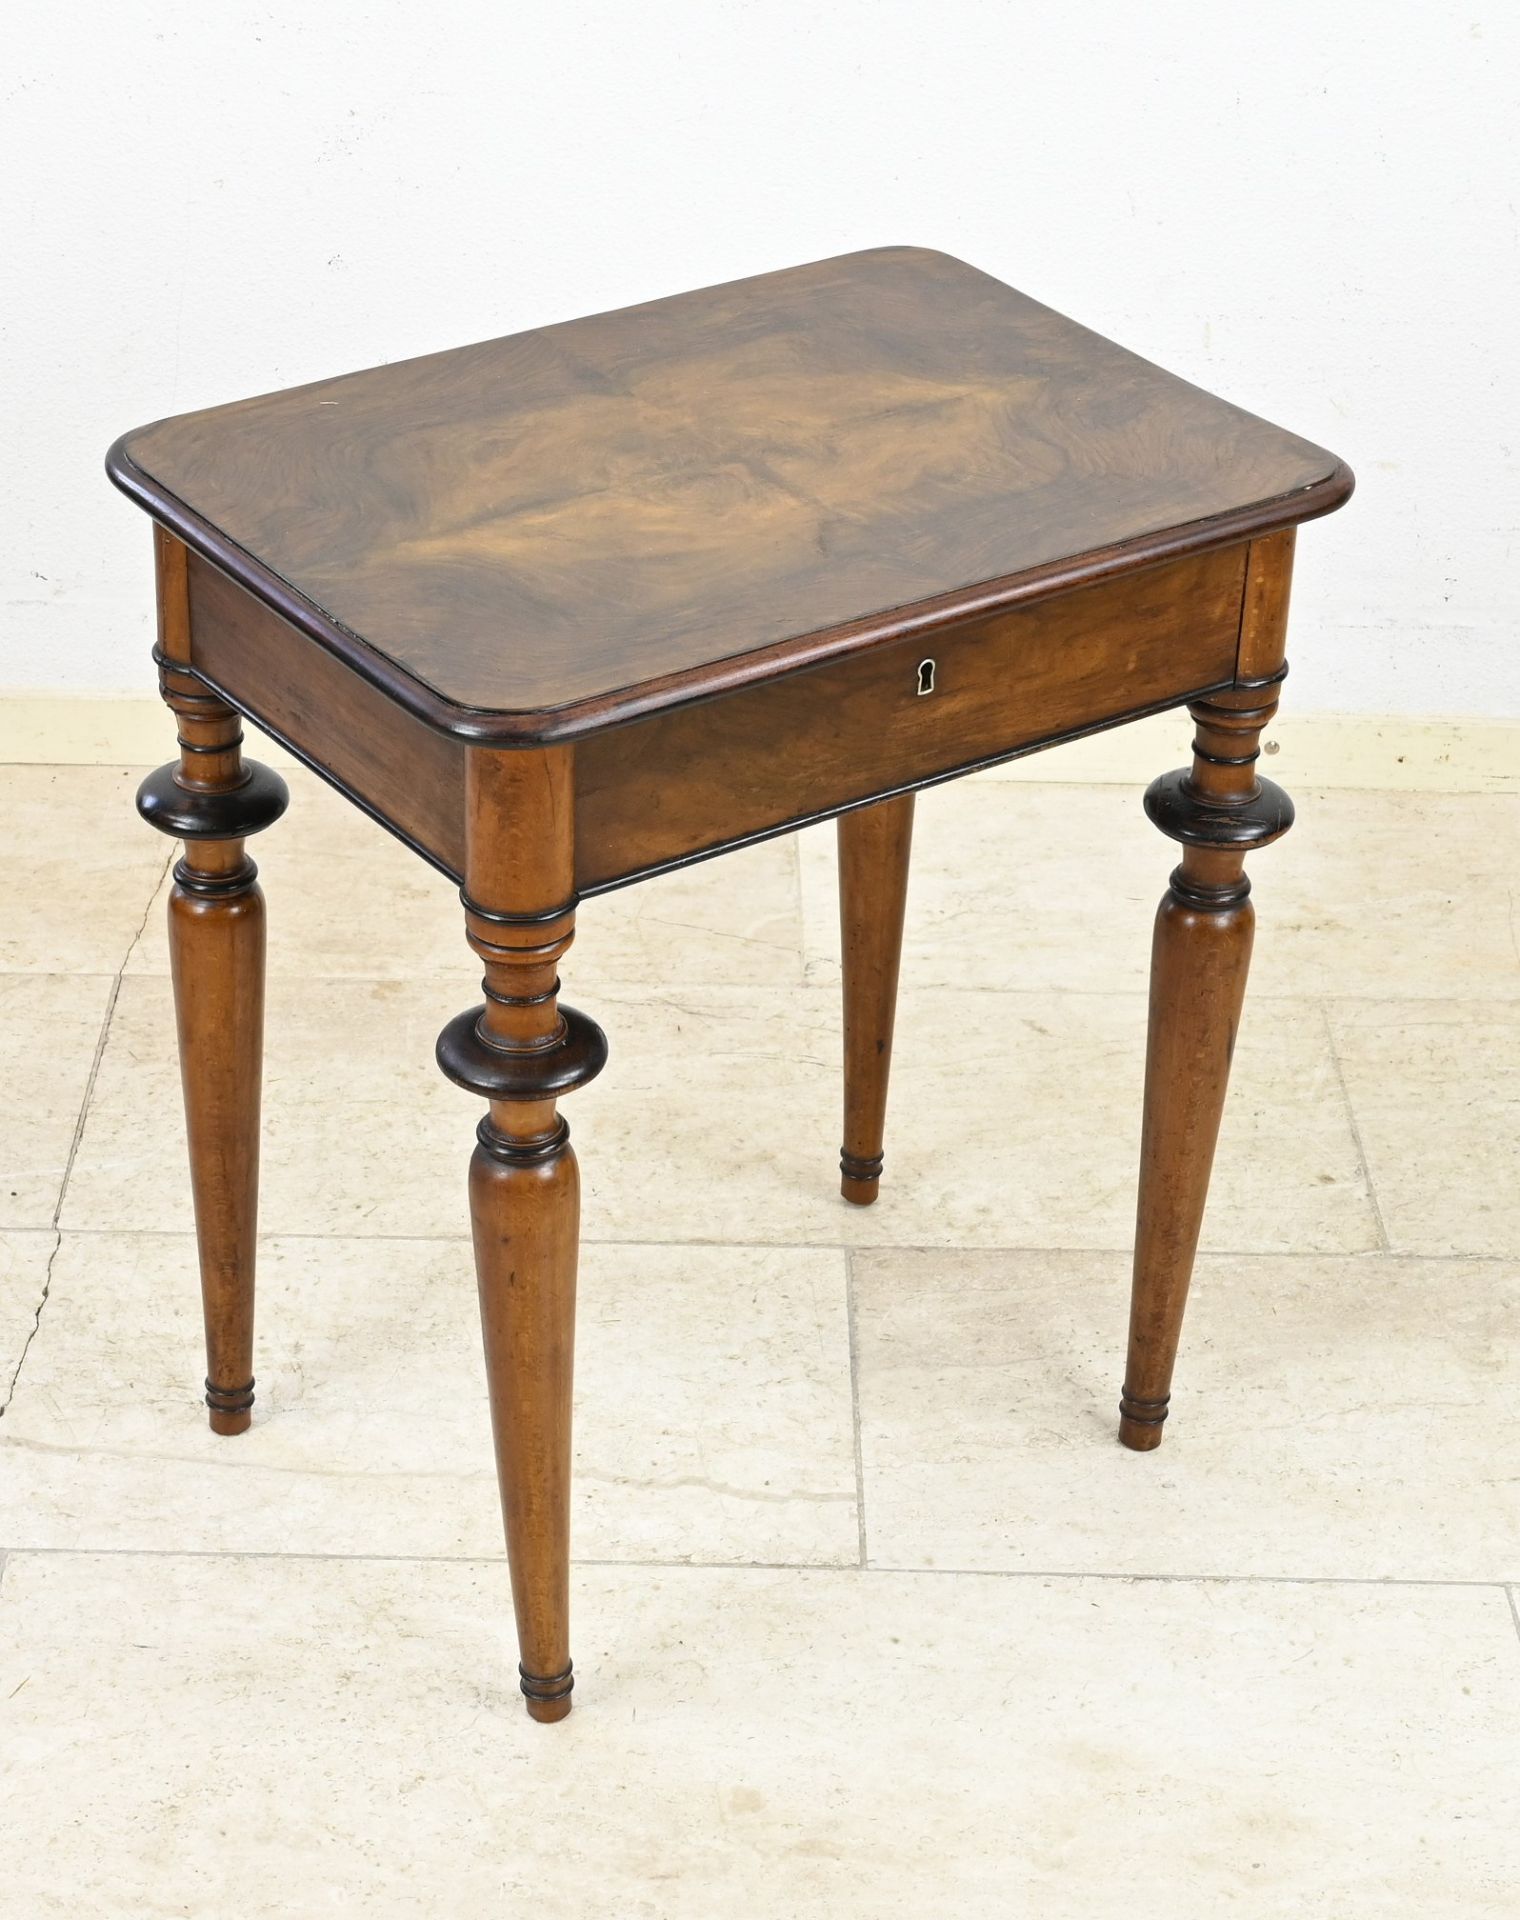 Antique sewing table, 1880